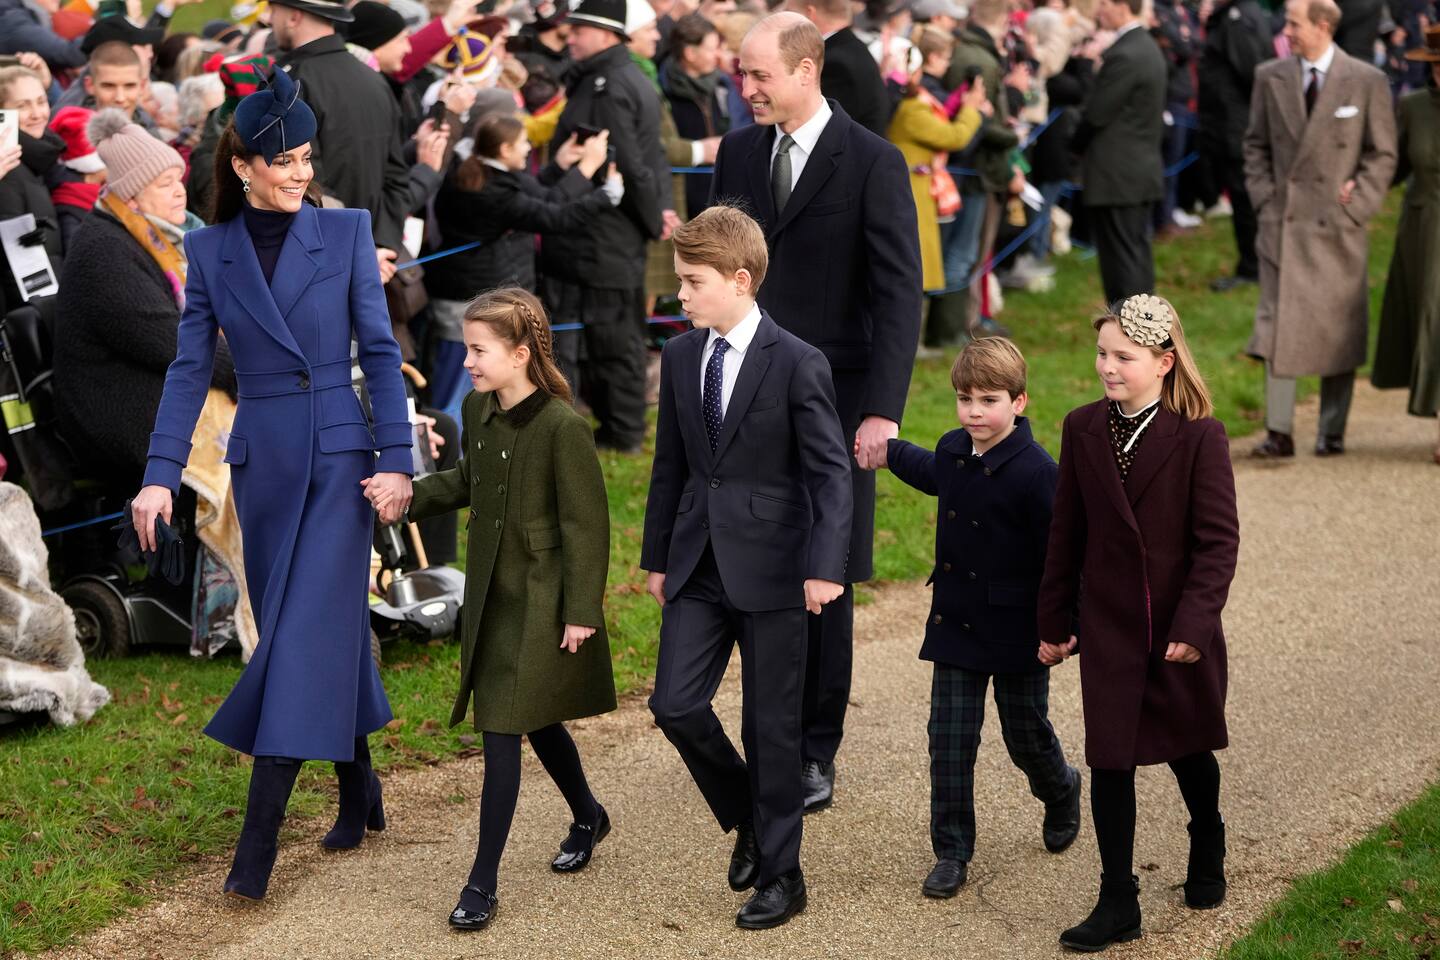 The Princess of Wales, Princess Charlotte, Prince George, the Prince of Wales, Prince Louis and Mia Tindall arrive to attend the Christmas Day service at St Mary Magdalene Church in Sandringham in Norfolk, England, last year. Photo / AP